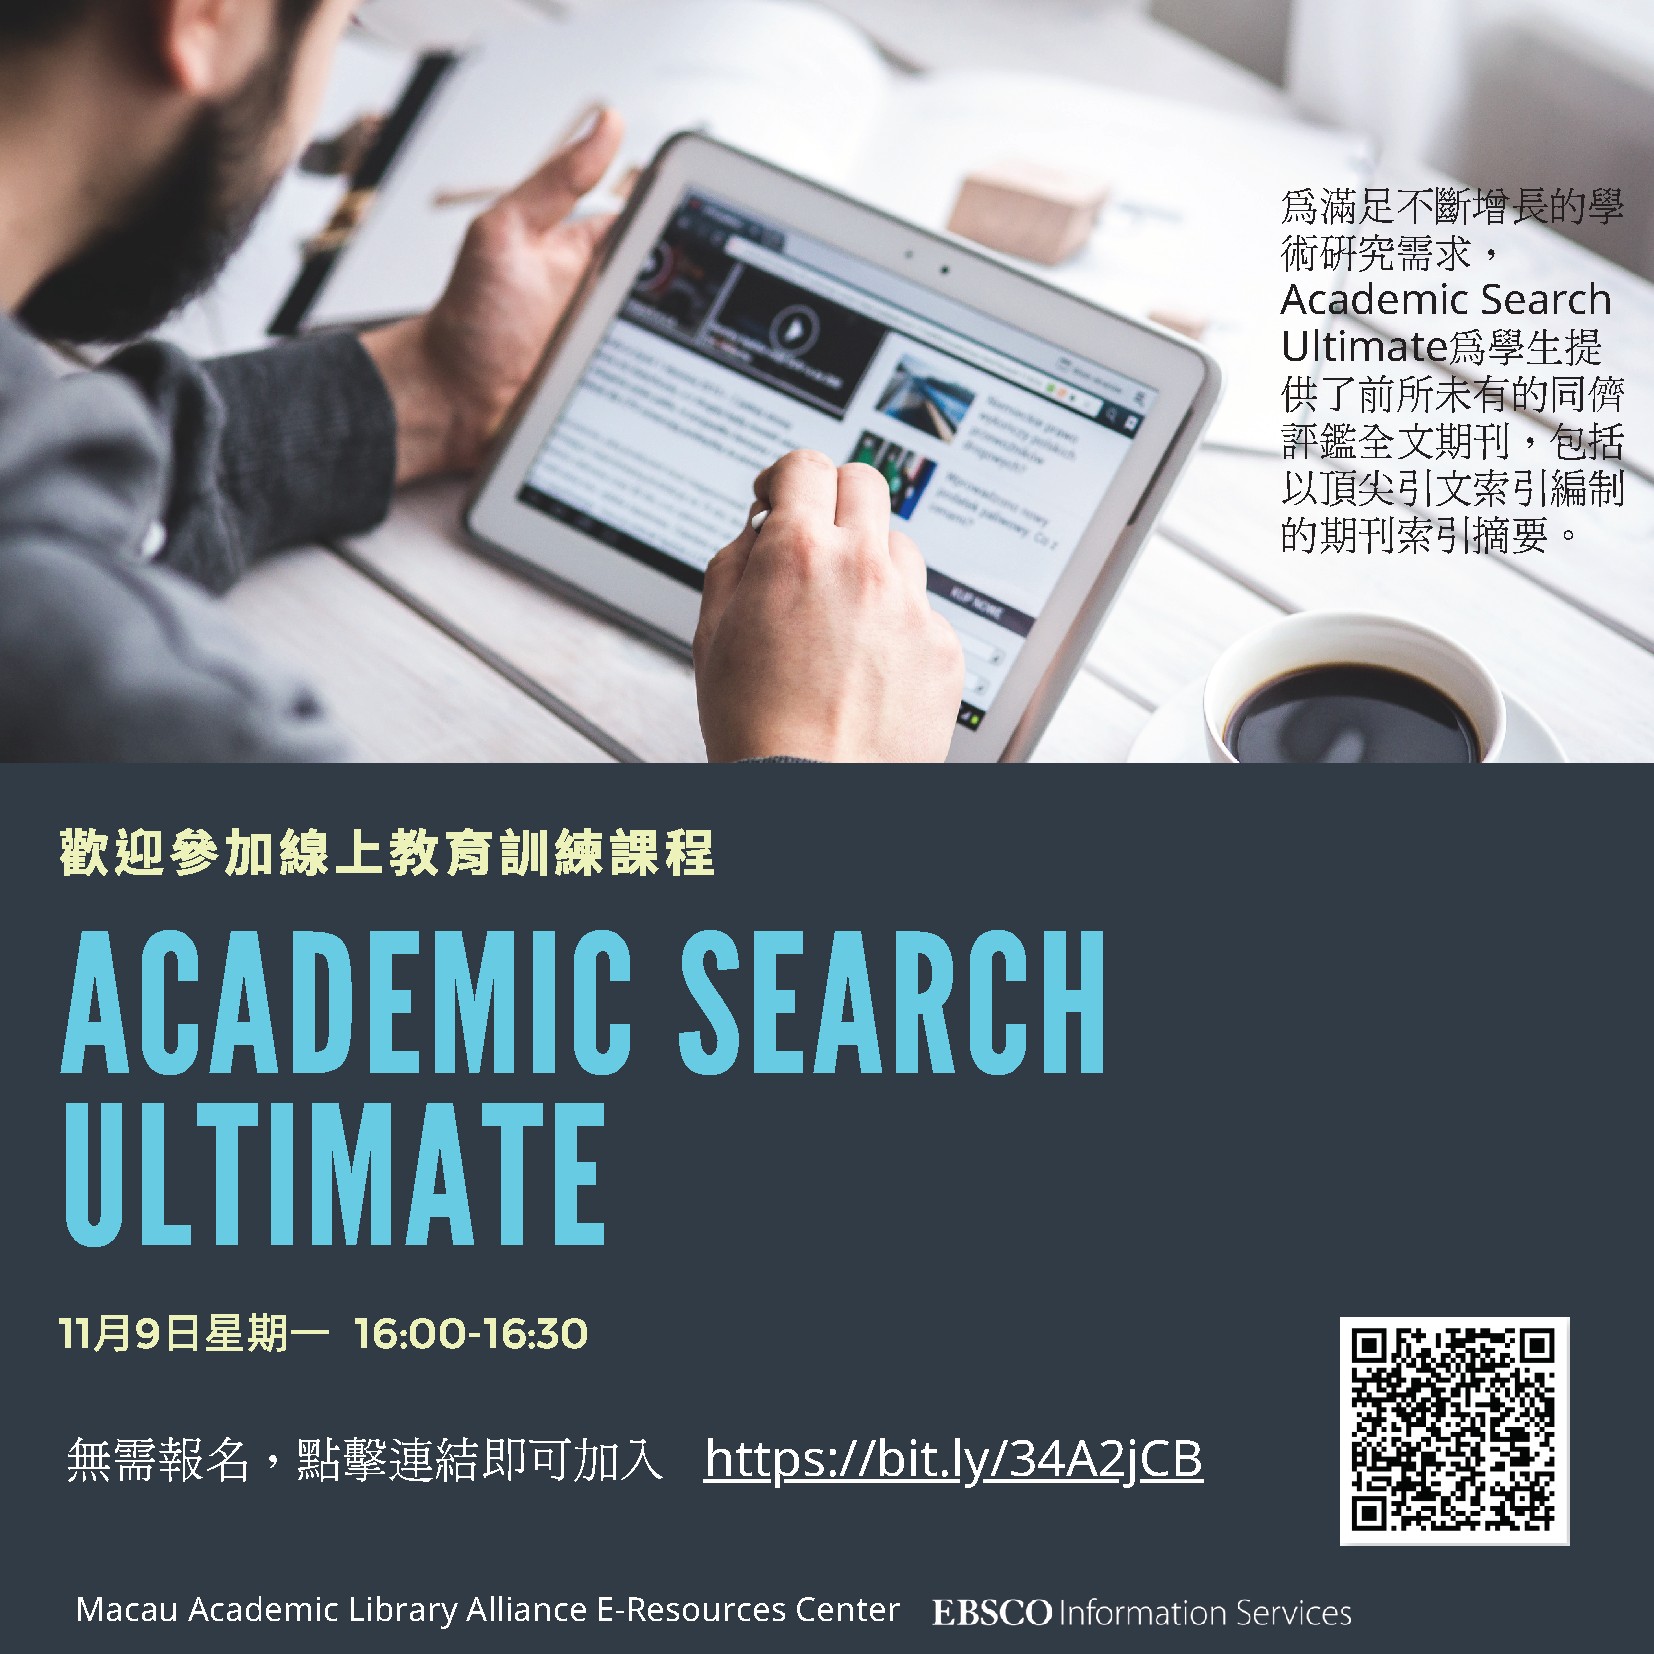 EBSCO Databases Online Training Sessions - Academic Search Ultimate (Chinese Session)